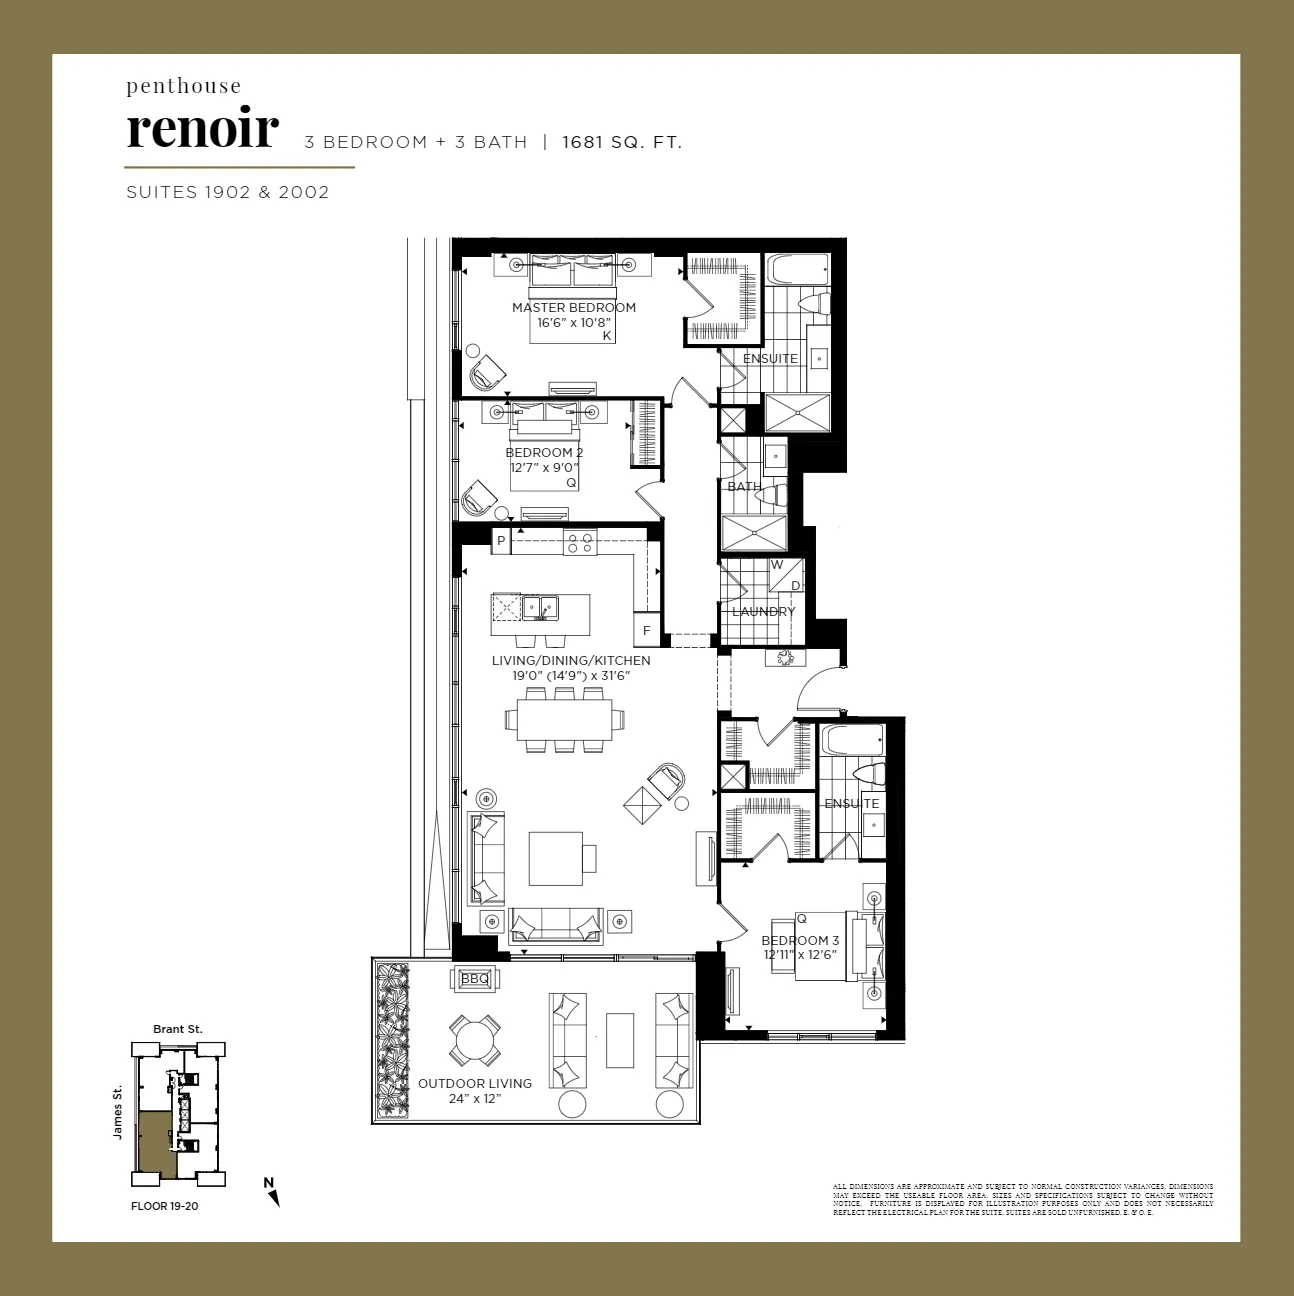  Floor Plan of Gallery Condos and Lofts with undefined beds